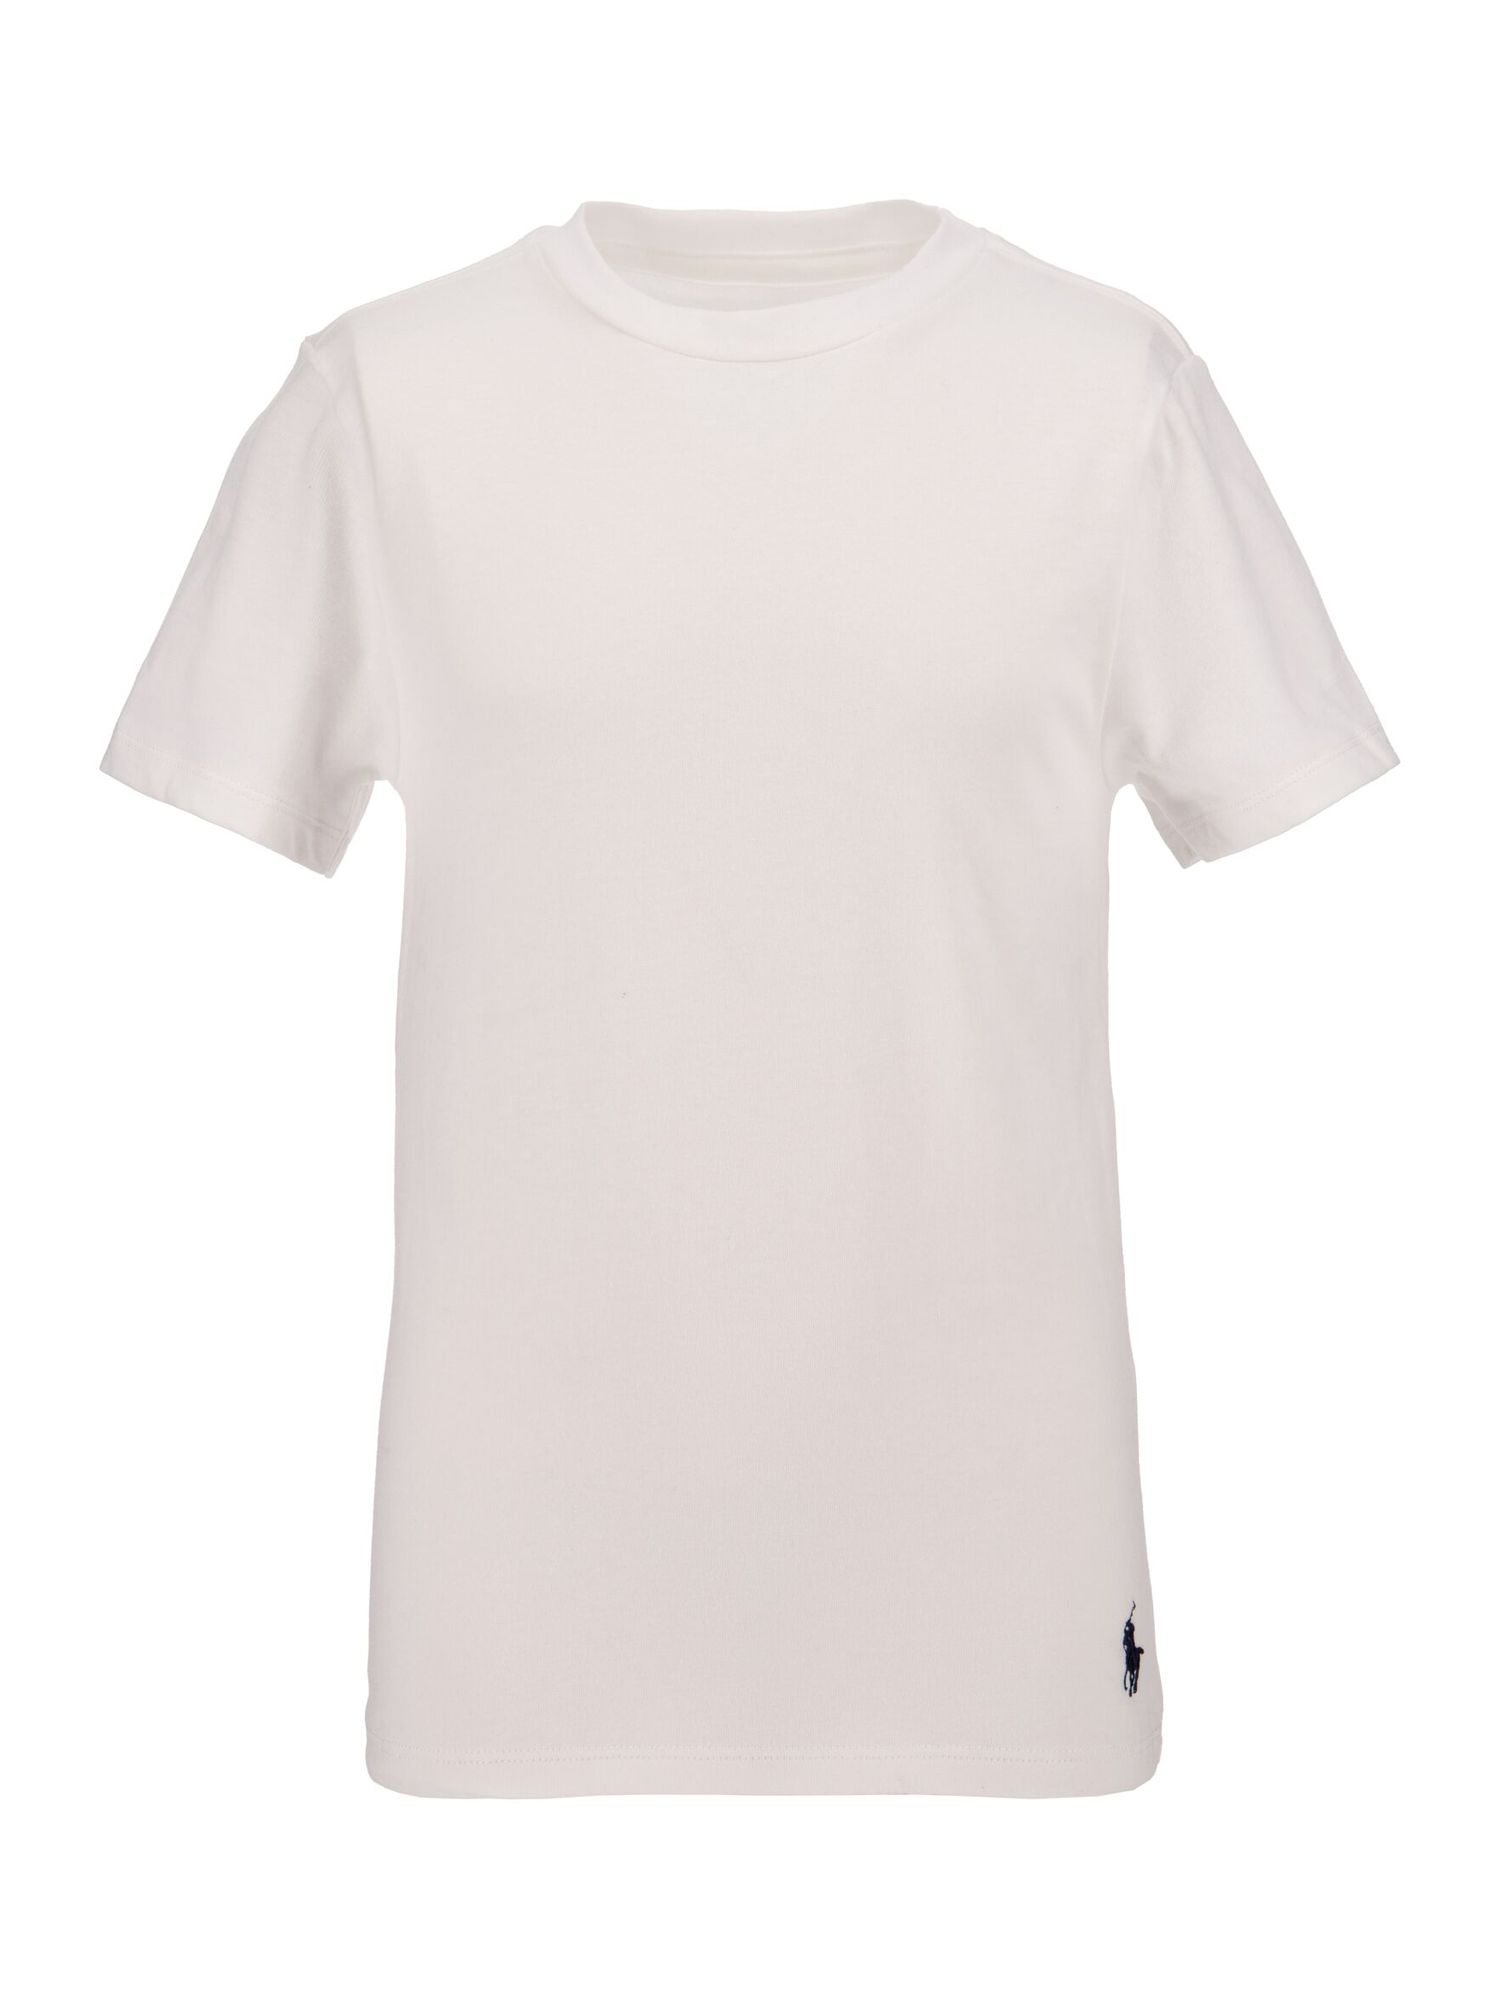 Polo Ralph Lauren TRIPONOME White - Fast delivery  Spartoo Europe ! -  Clothing short-sleeved polo shirts Child 57,60 €